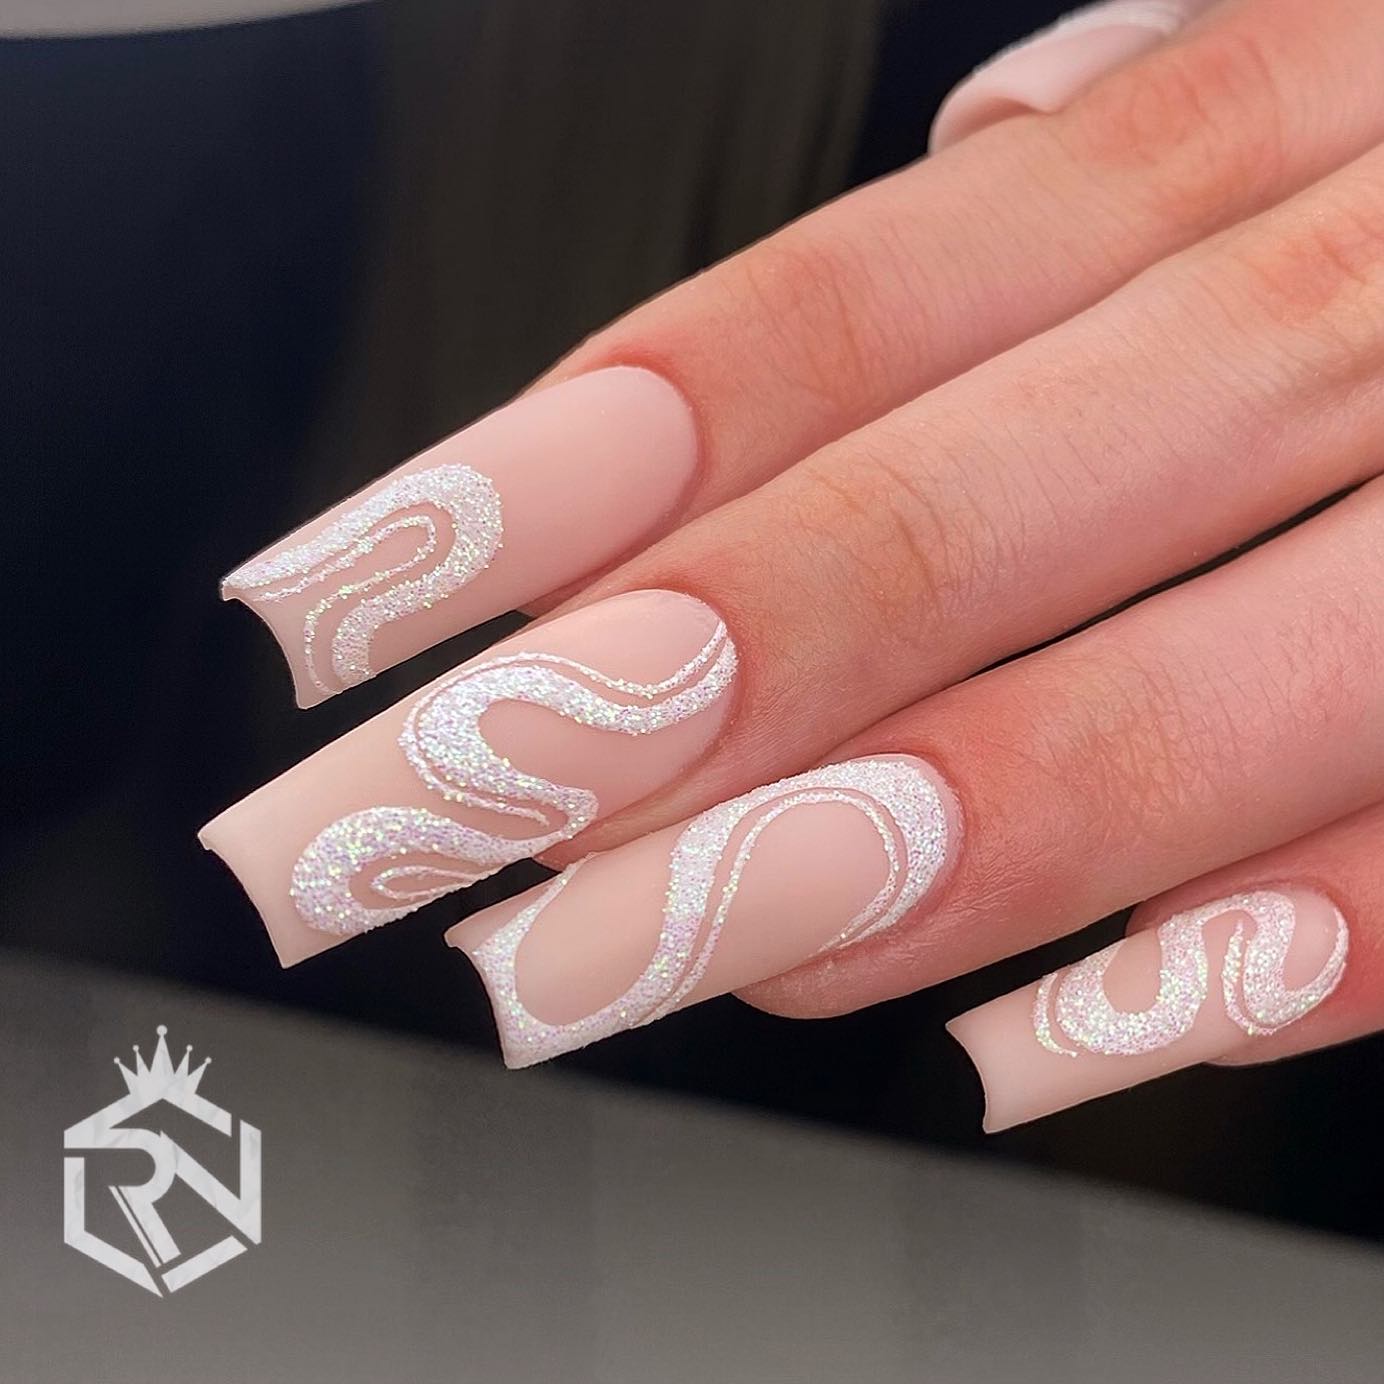 Shiny white swirl nails are such a fun and easy way to add some color and sparkle to your nude matte nail polish. They can be suitable for your wedding day or any special event.